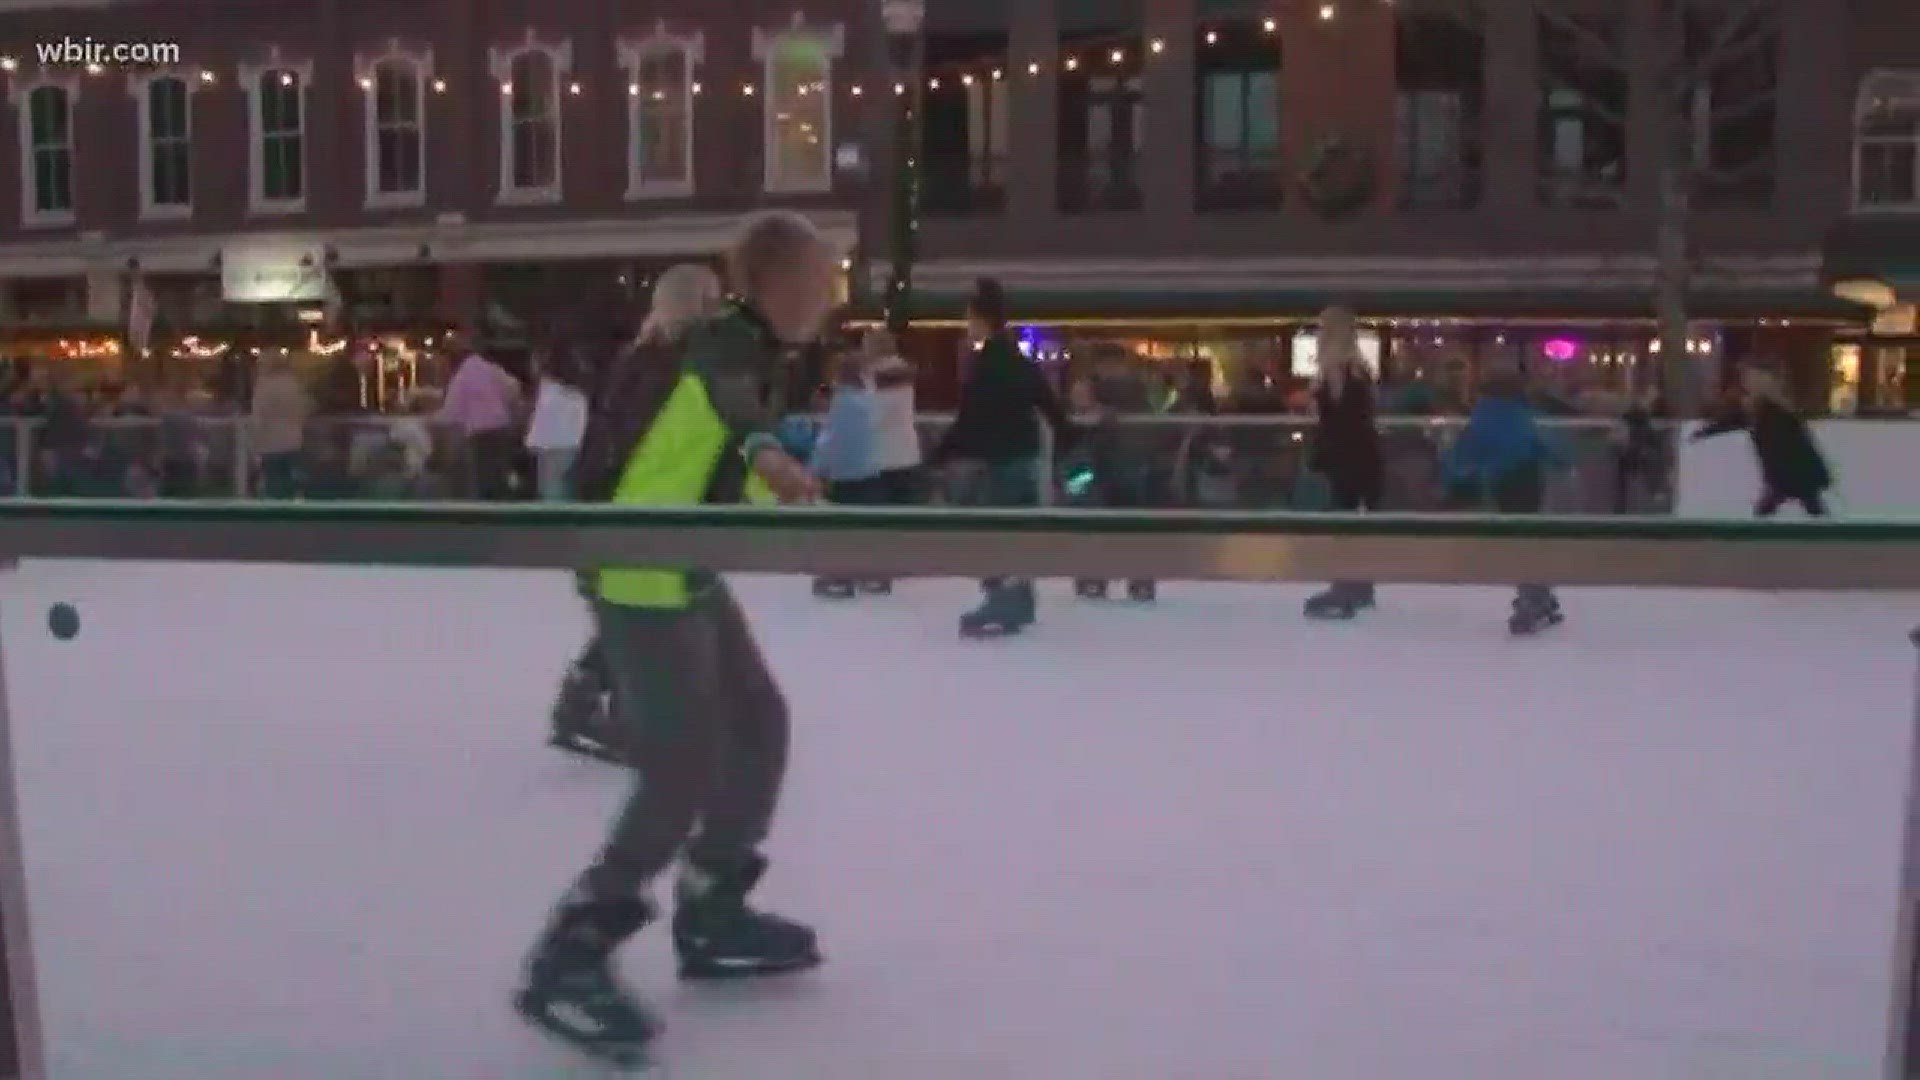 Nov. 24, 2017: The Market Square ice skating rink is now open for the season.